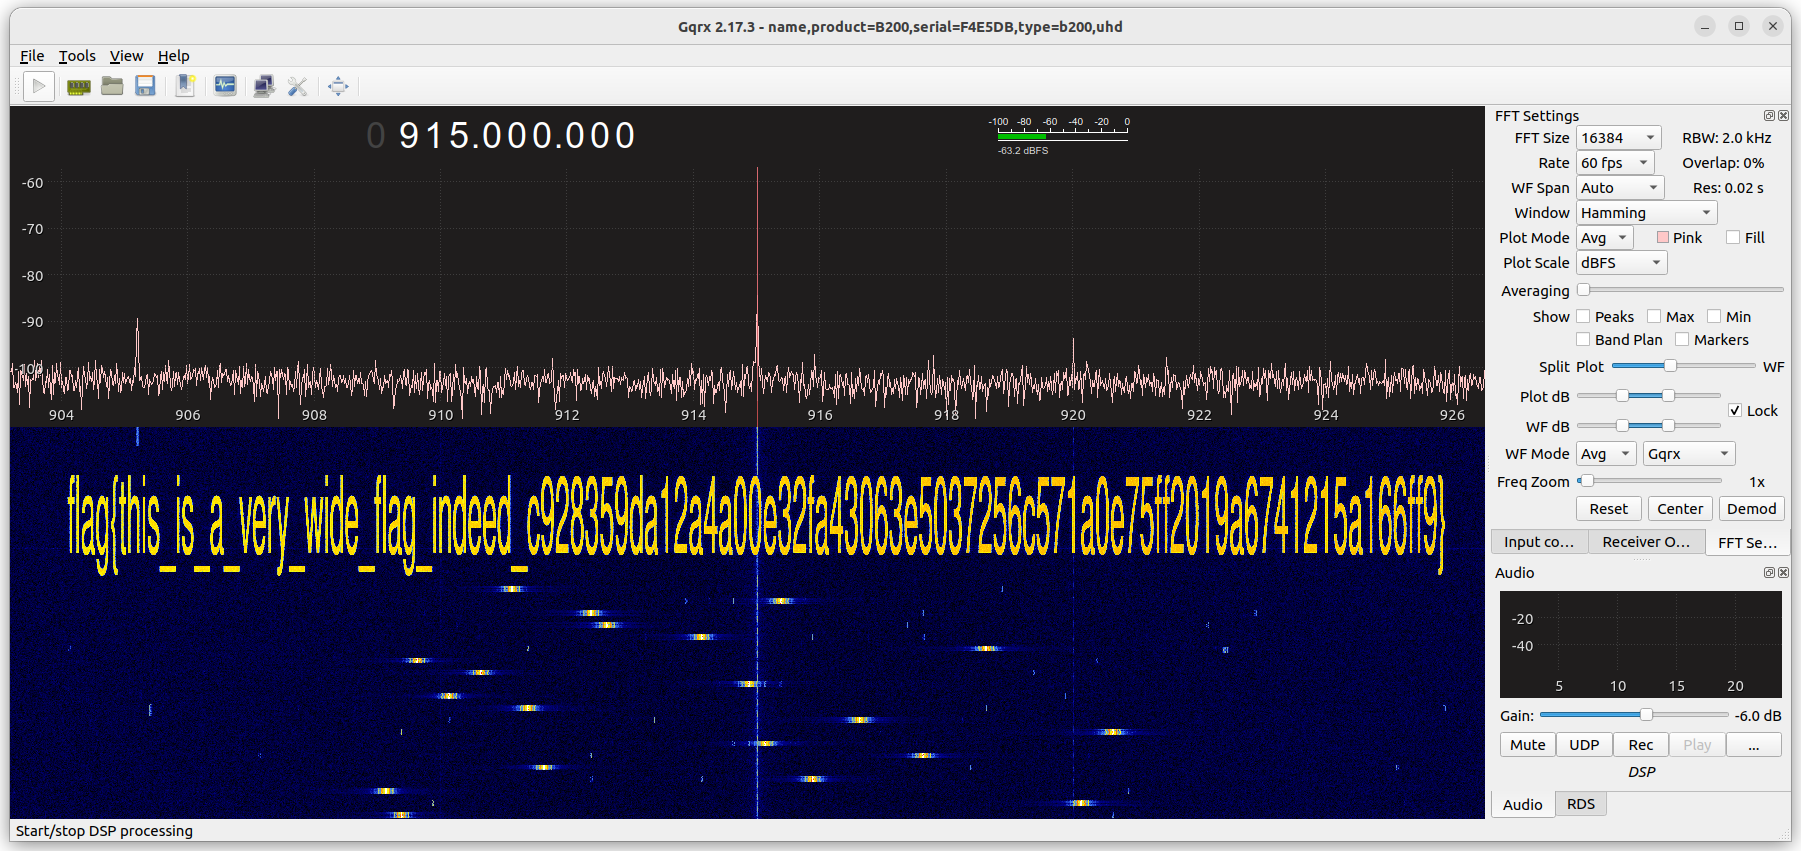 Screenshot of Gqrx, showing "flag{this_is_a_very_wide_flag_indeed_c928359da12a4a00e32fa43063e5037256c571a0e75ff2019a6741215a166ff9}" in the waterfall